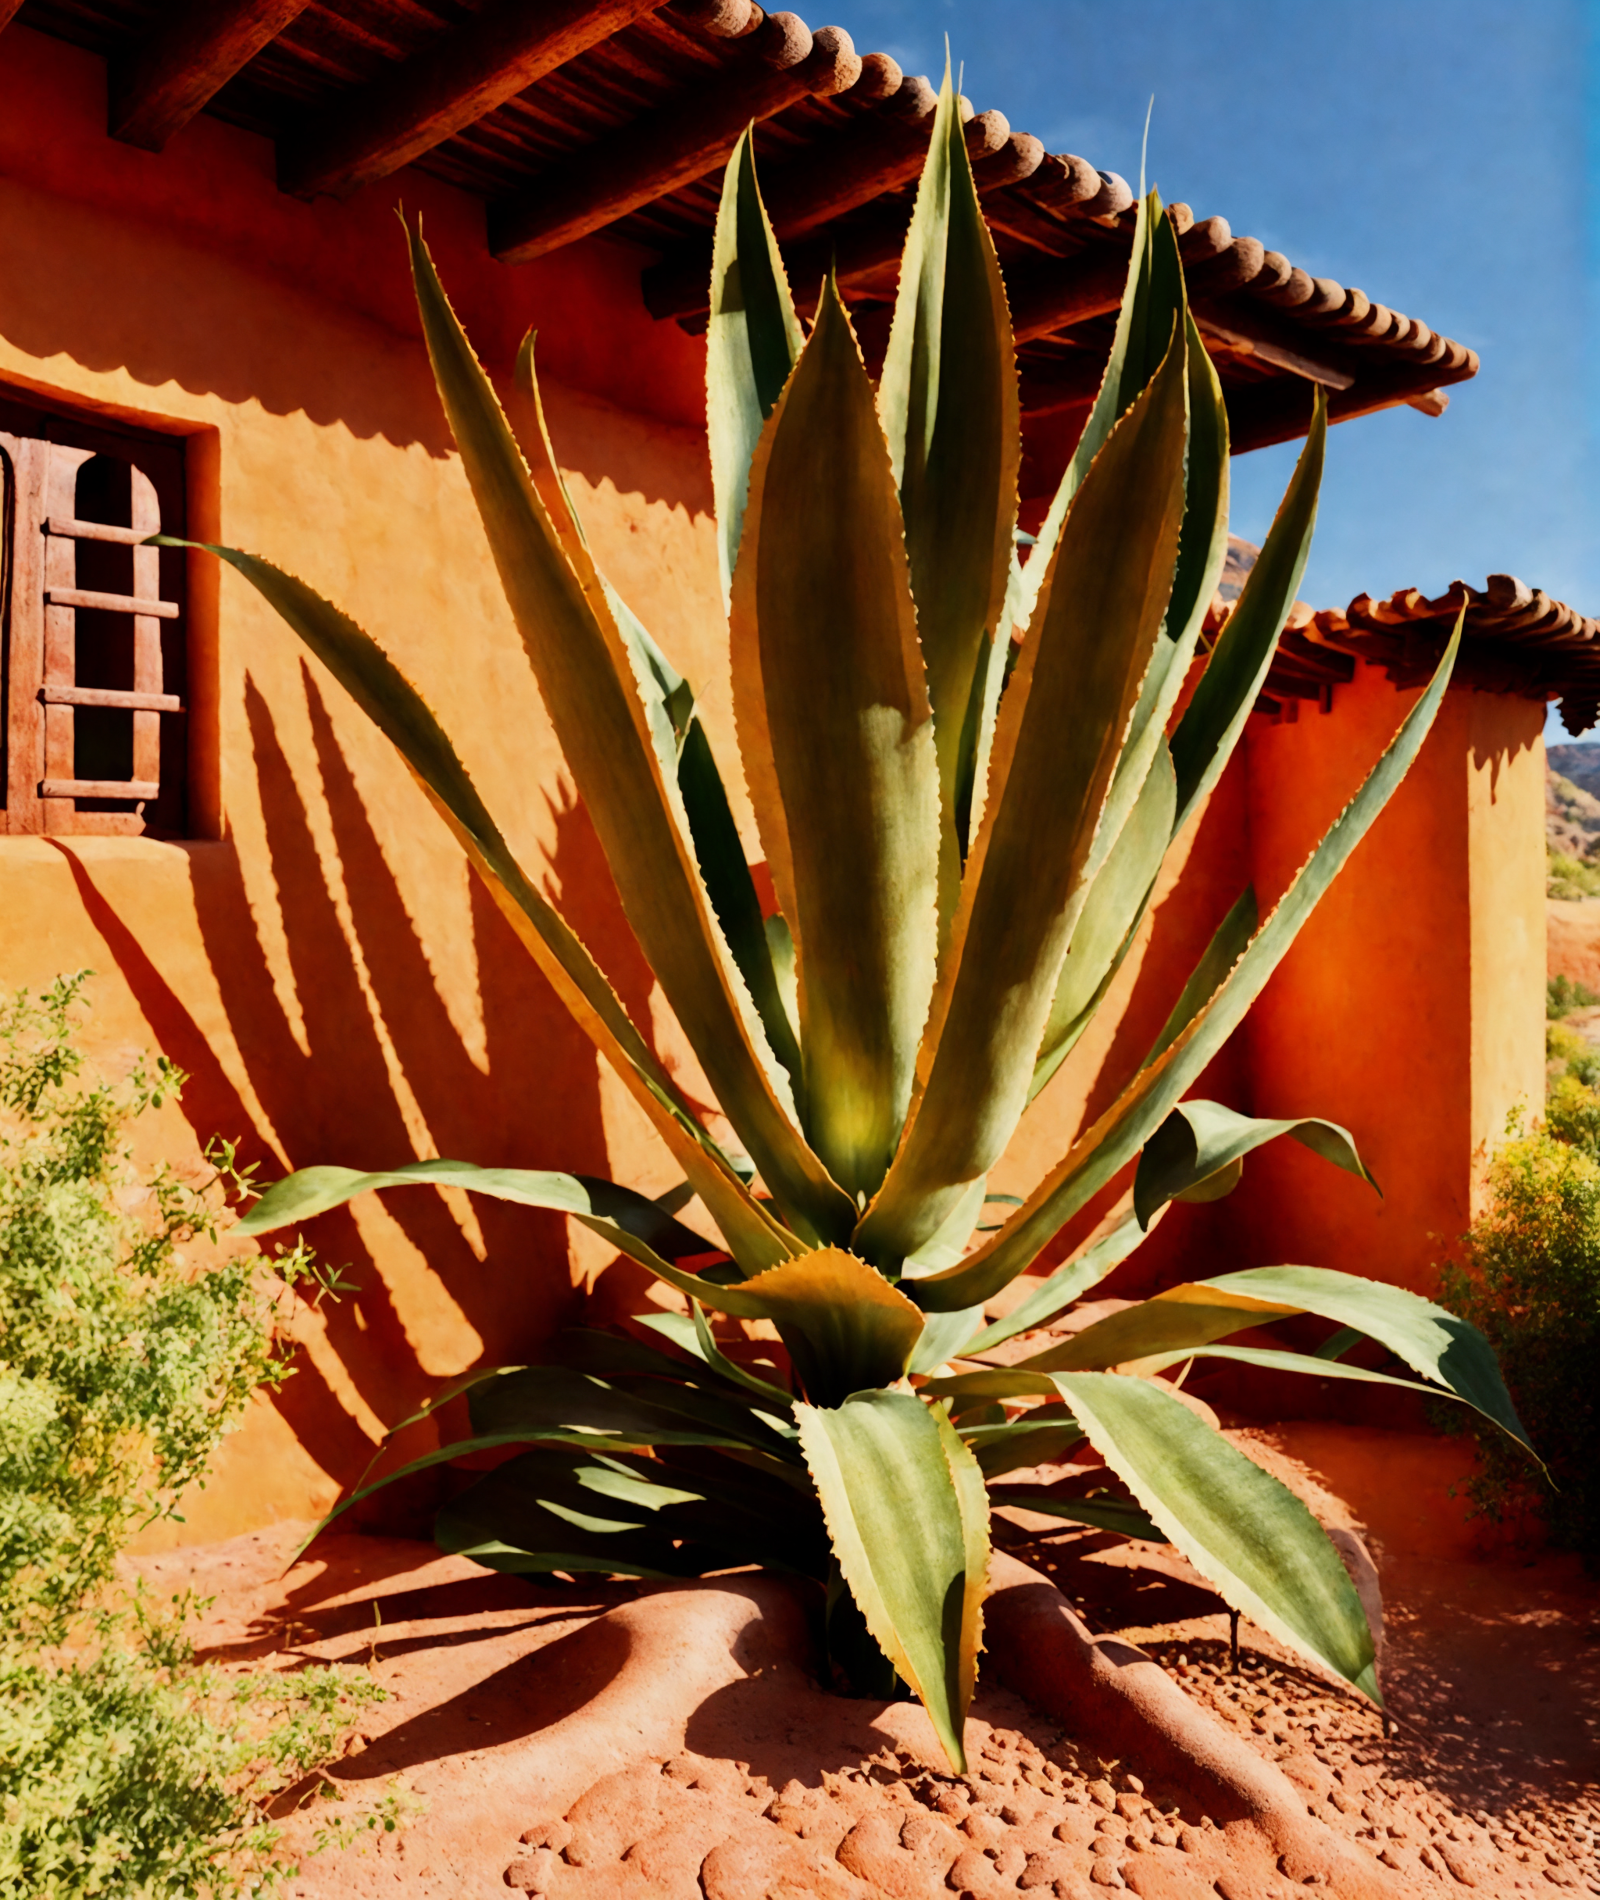 Agave americana plants beside a Mexican-style house, basking in bright sunlight on desert soil.